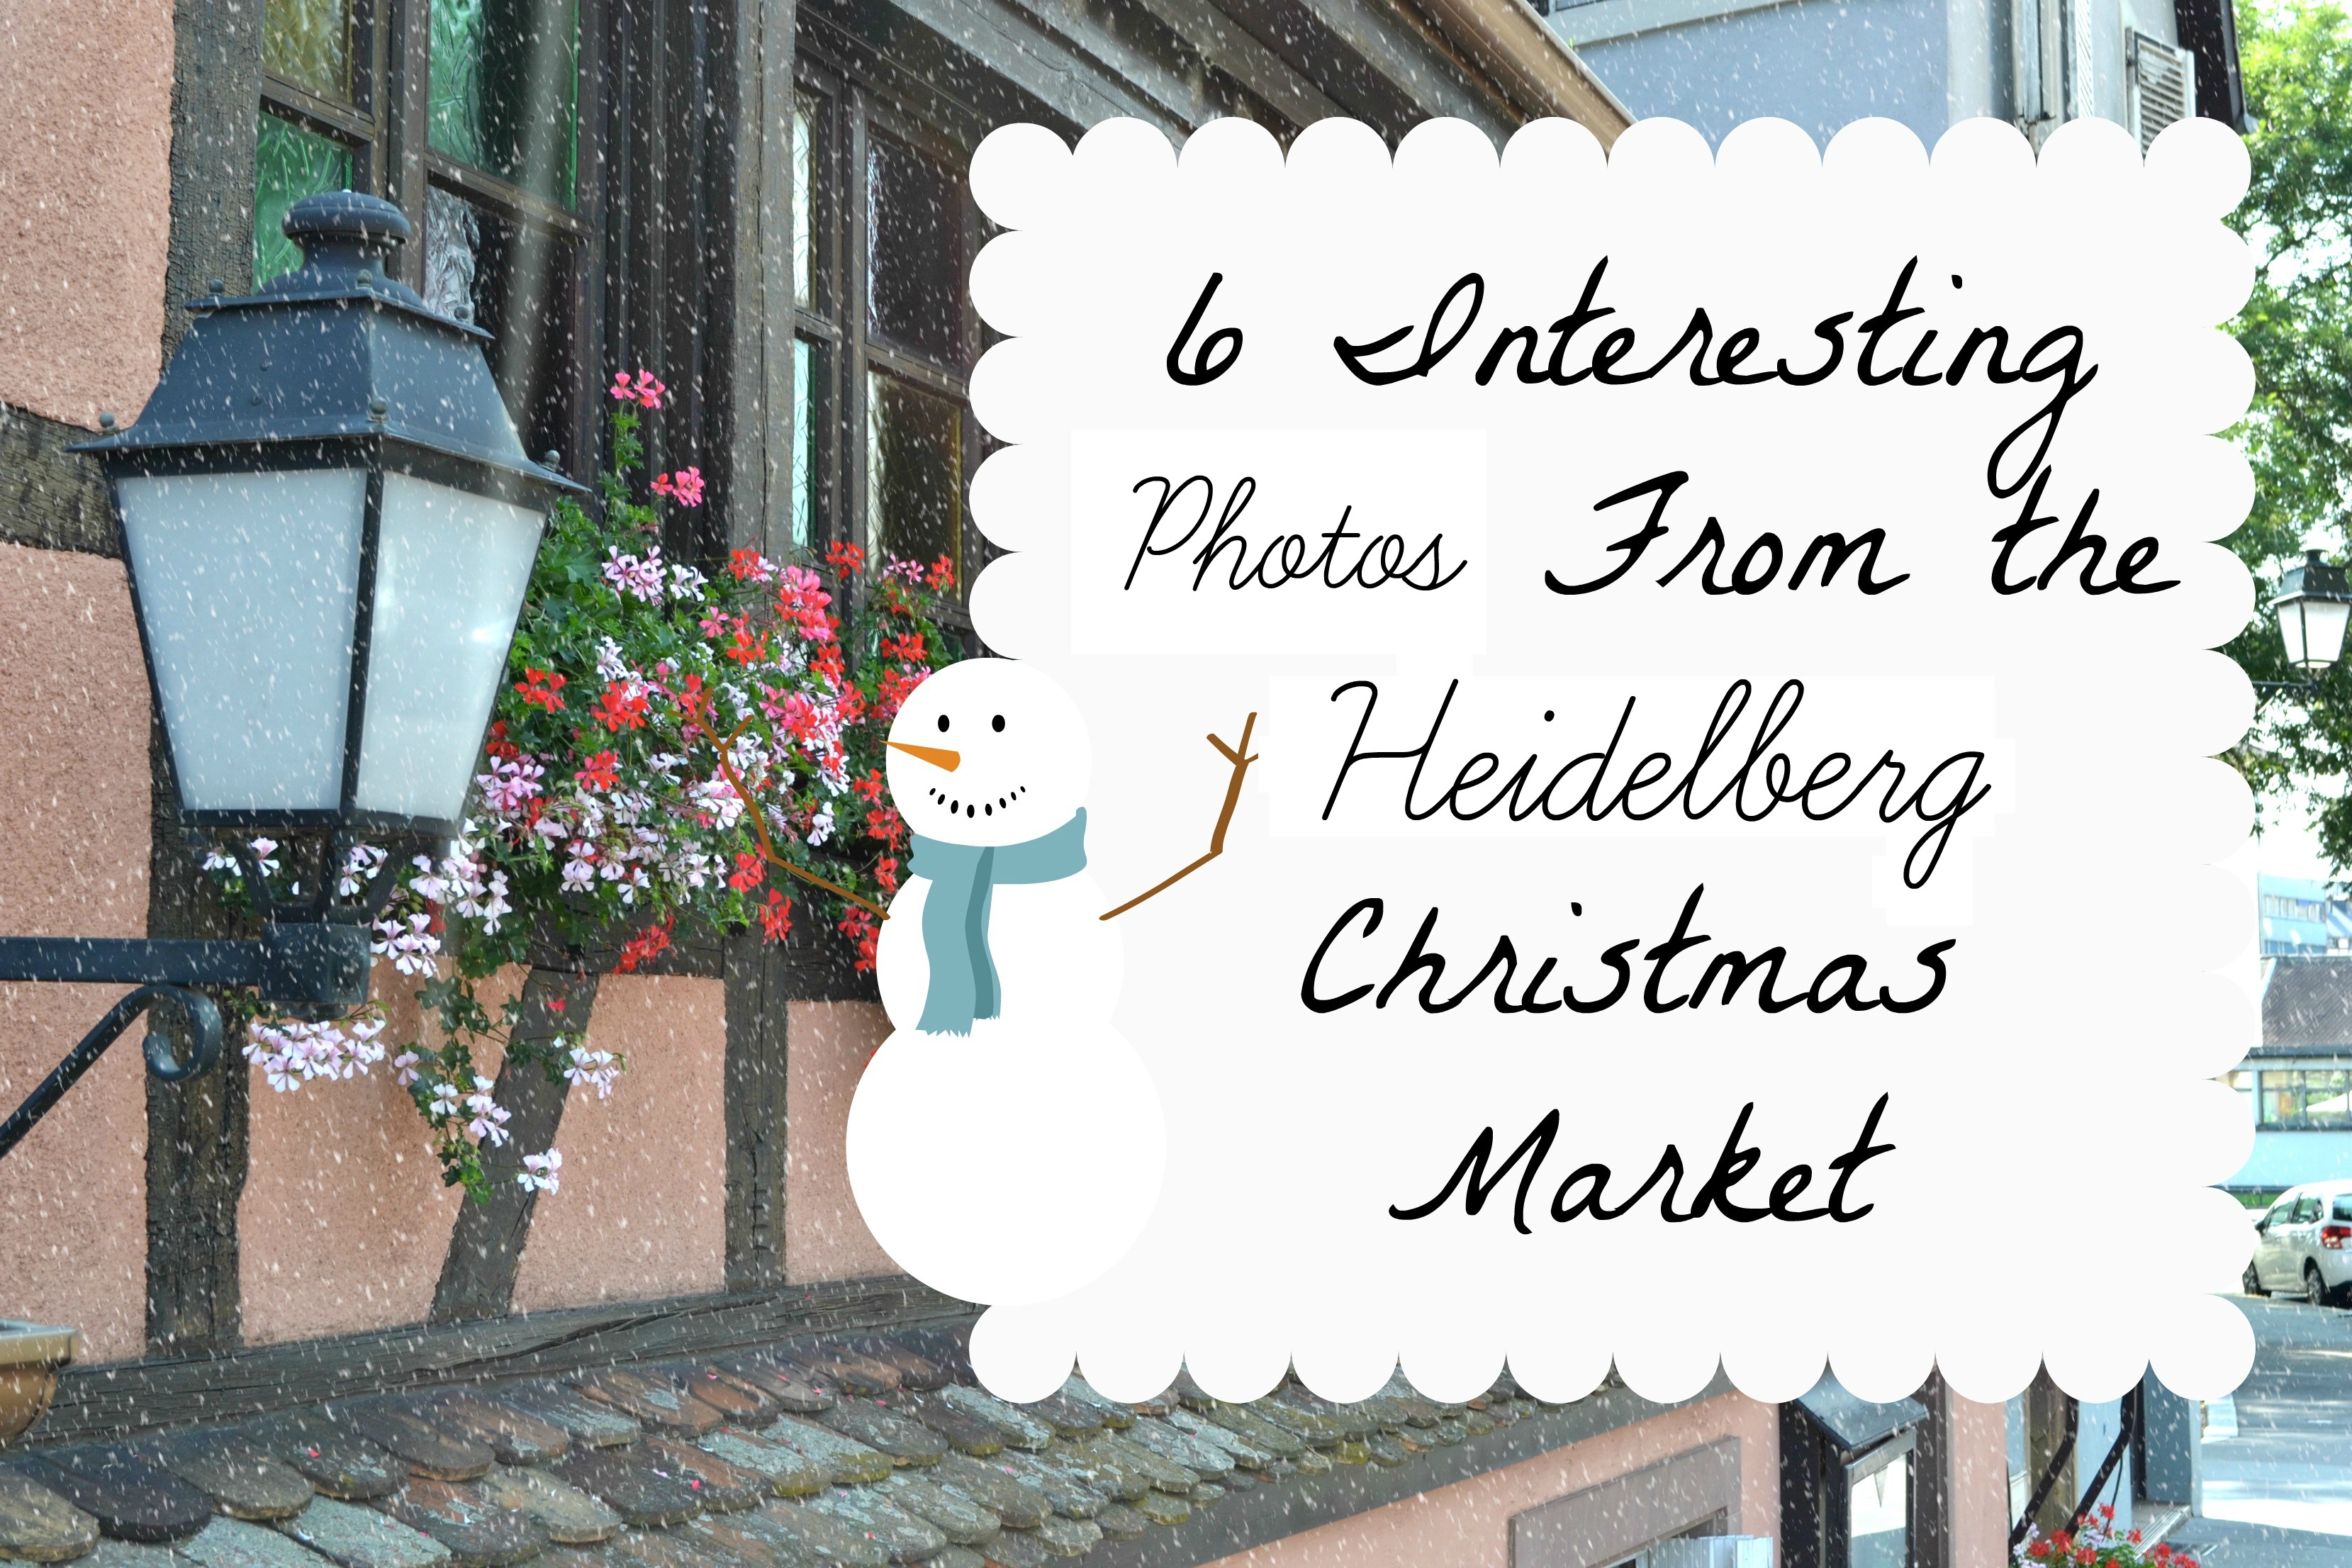 6 of the Best Christmas Photos from Heidelberg